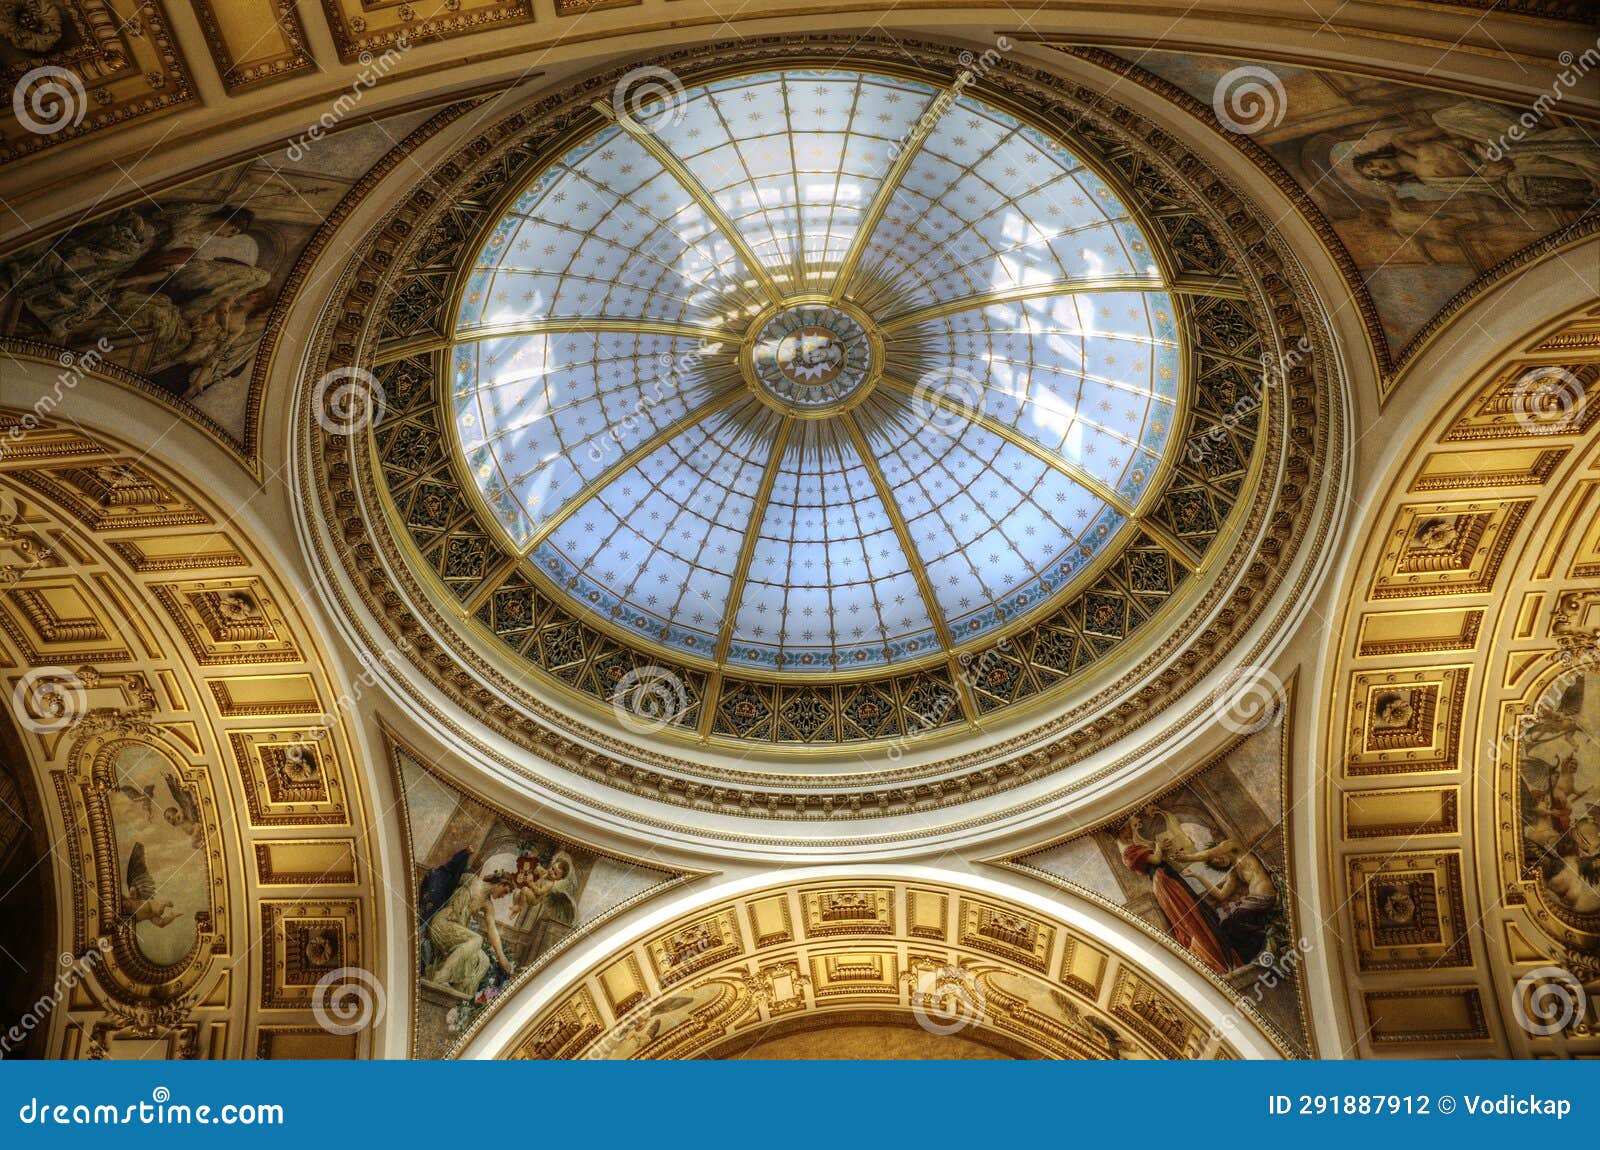 domed ceiling in prague national museum